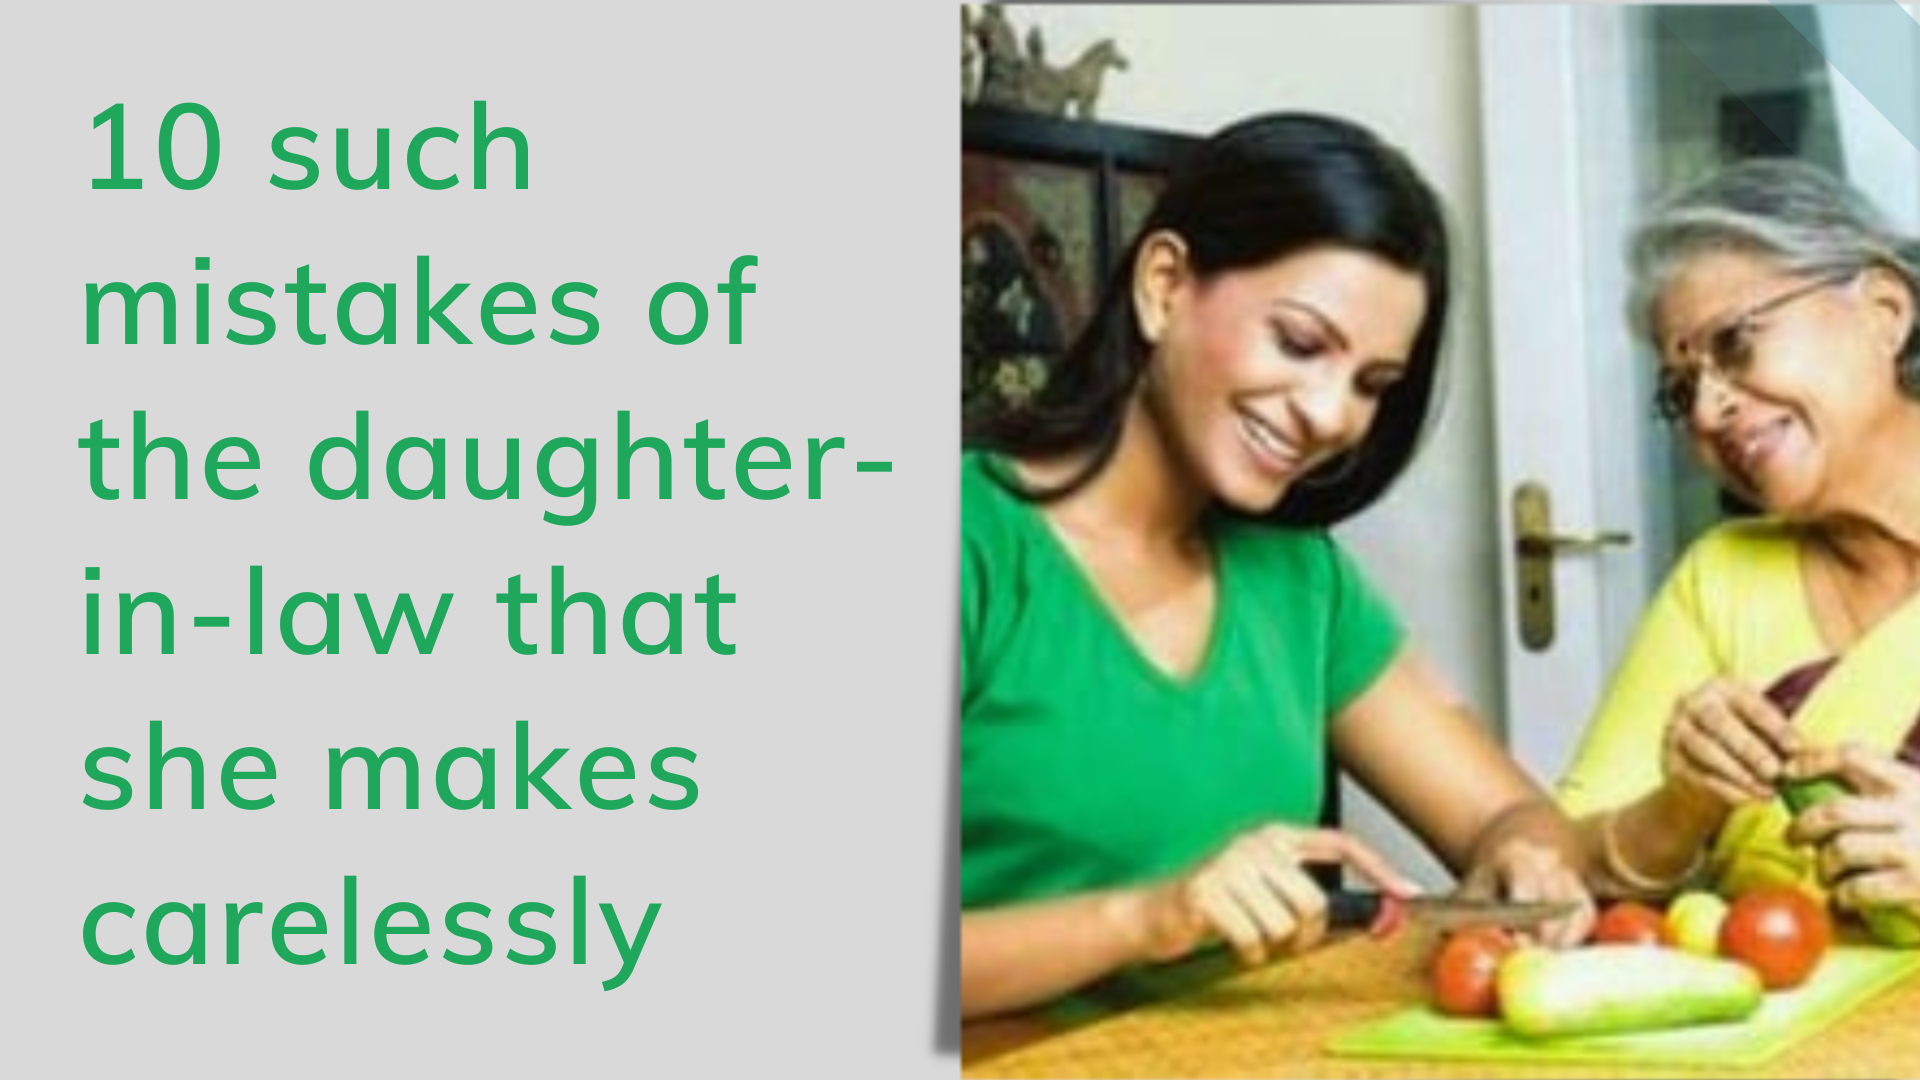 10 ways to deal problems between mother-in-law and daughter-in-law